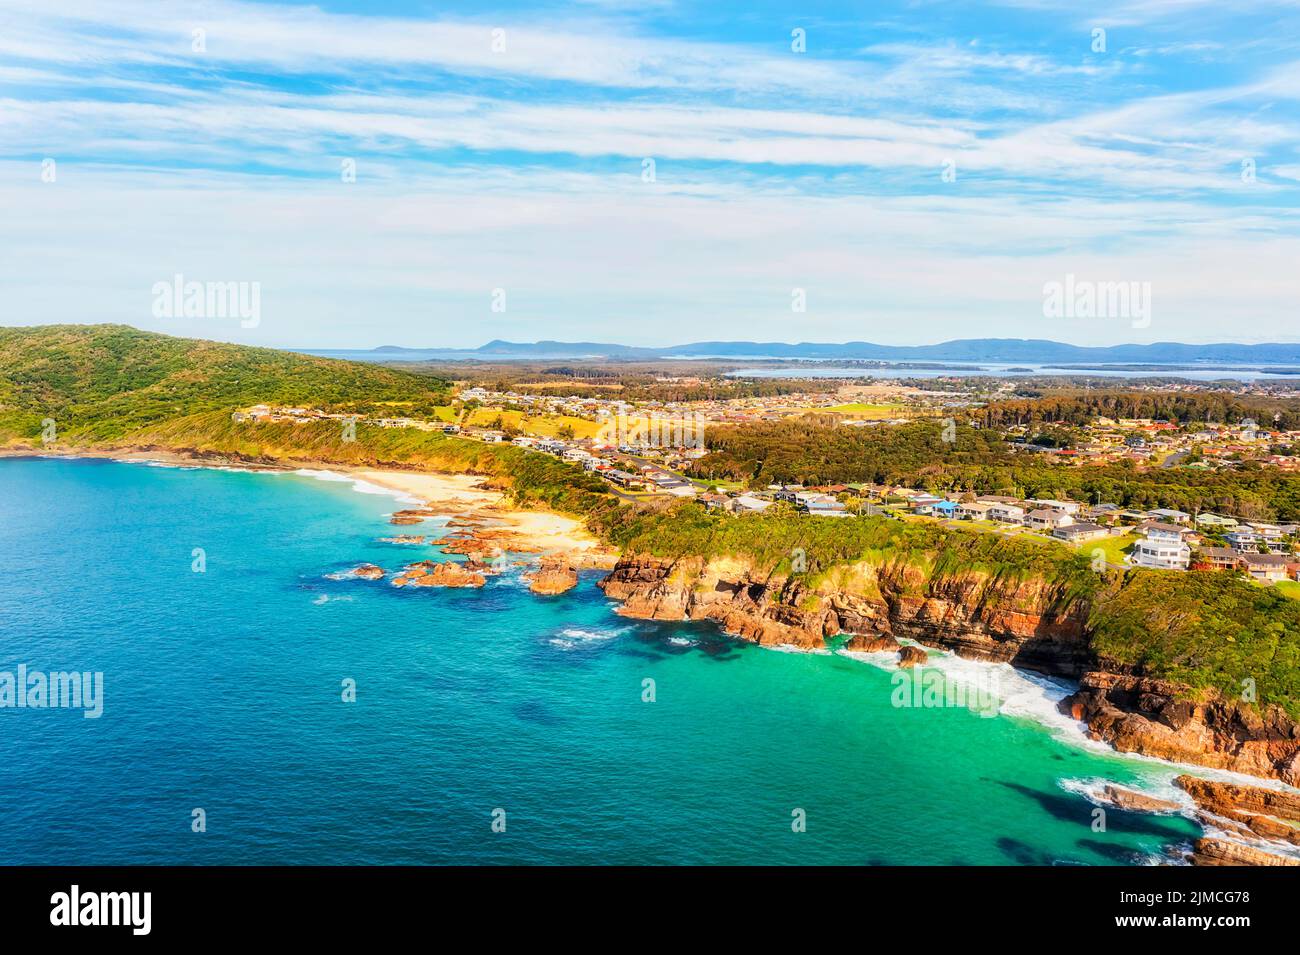 Rocks and cliffs on Pacific coast around burgess beach in Forster town of australia - aerial landscape view from open sea. Stock Photo